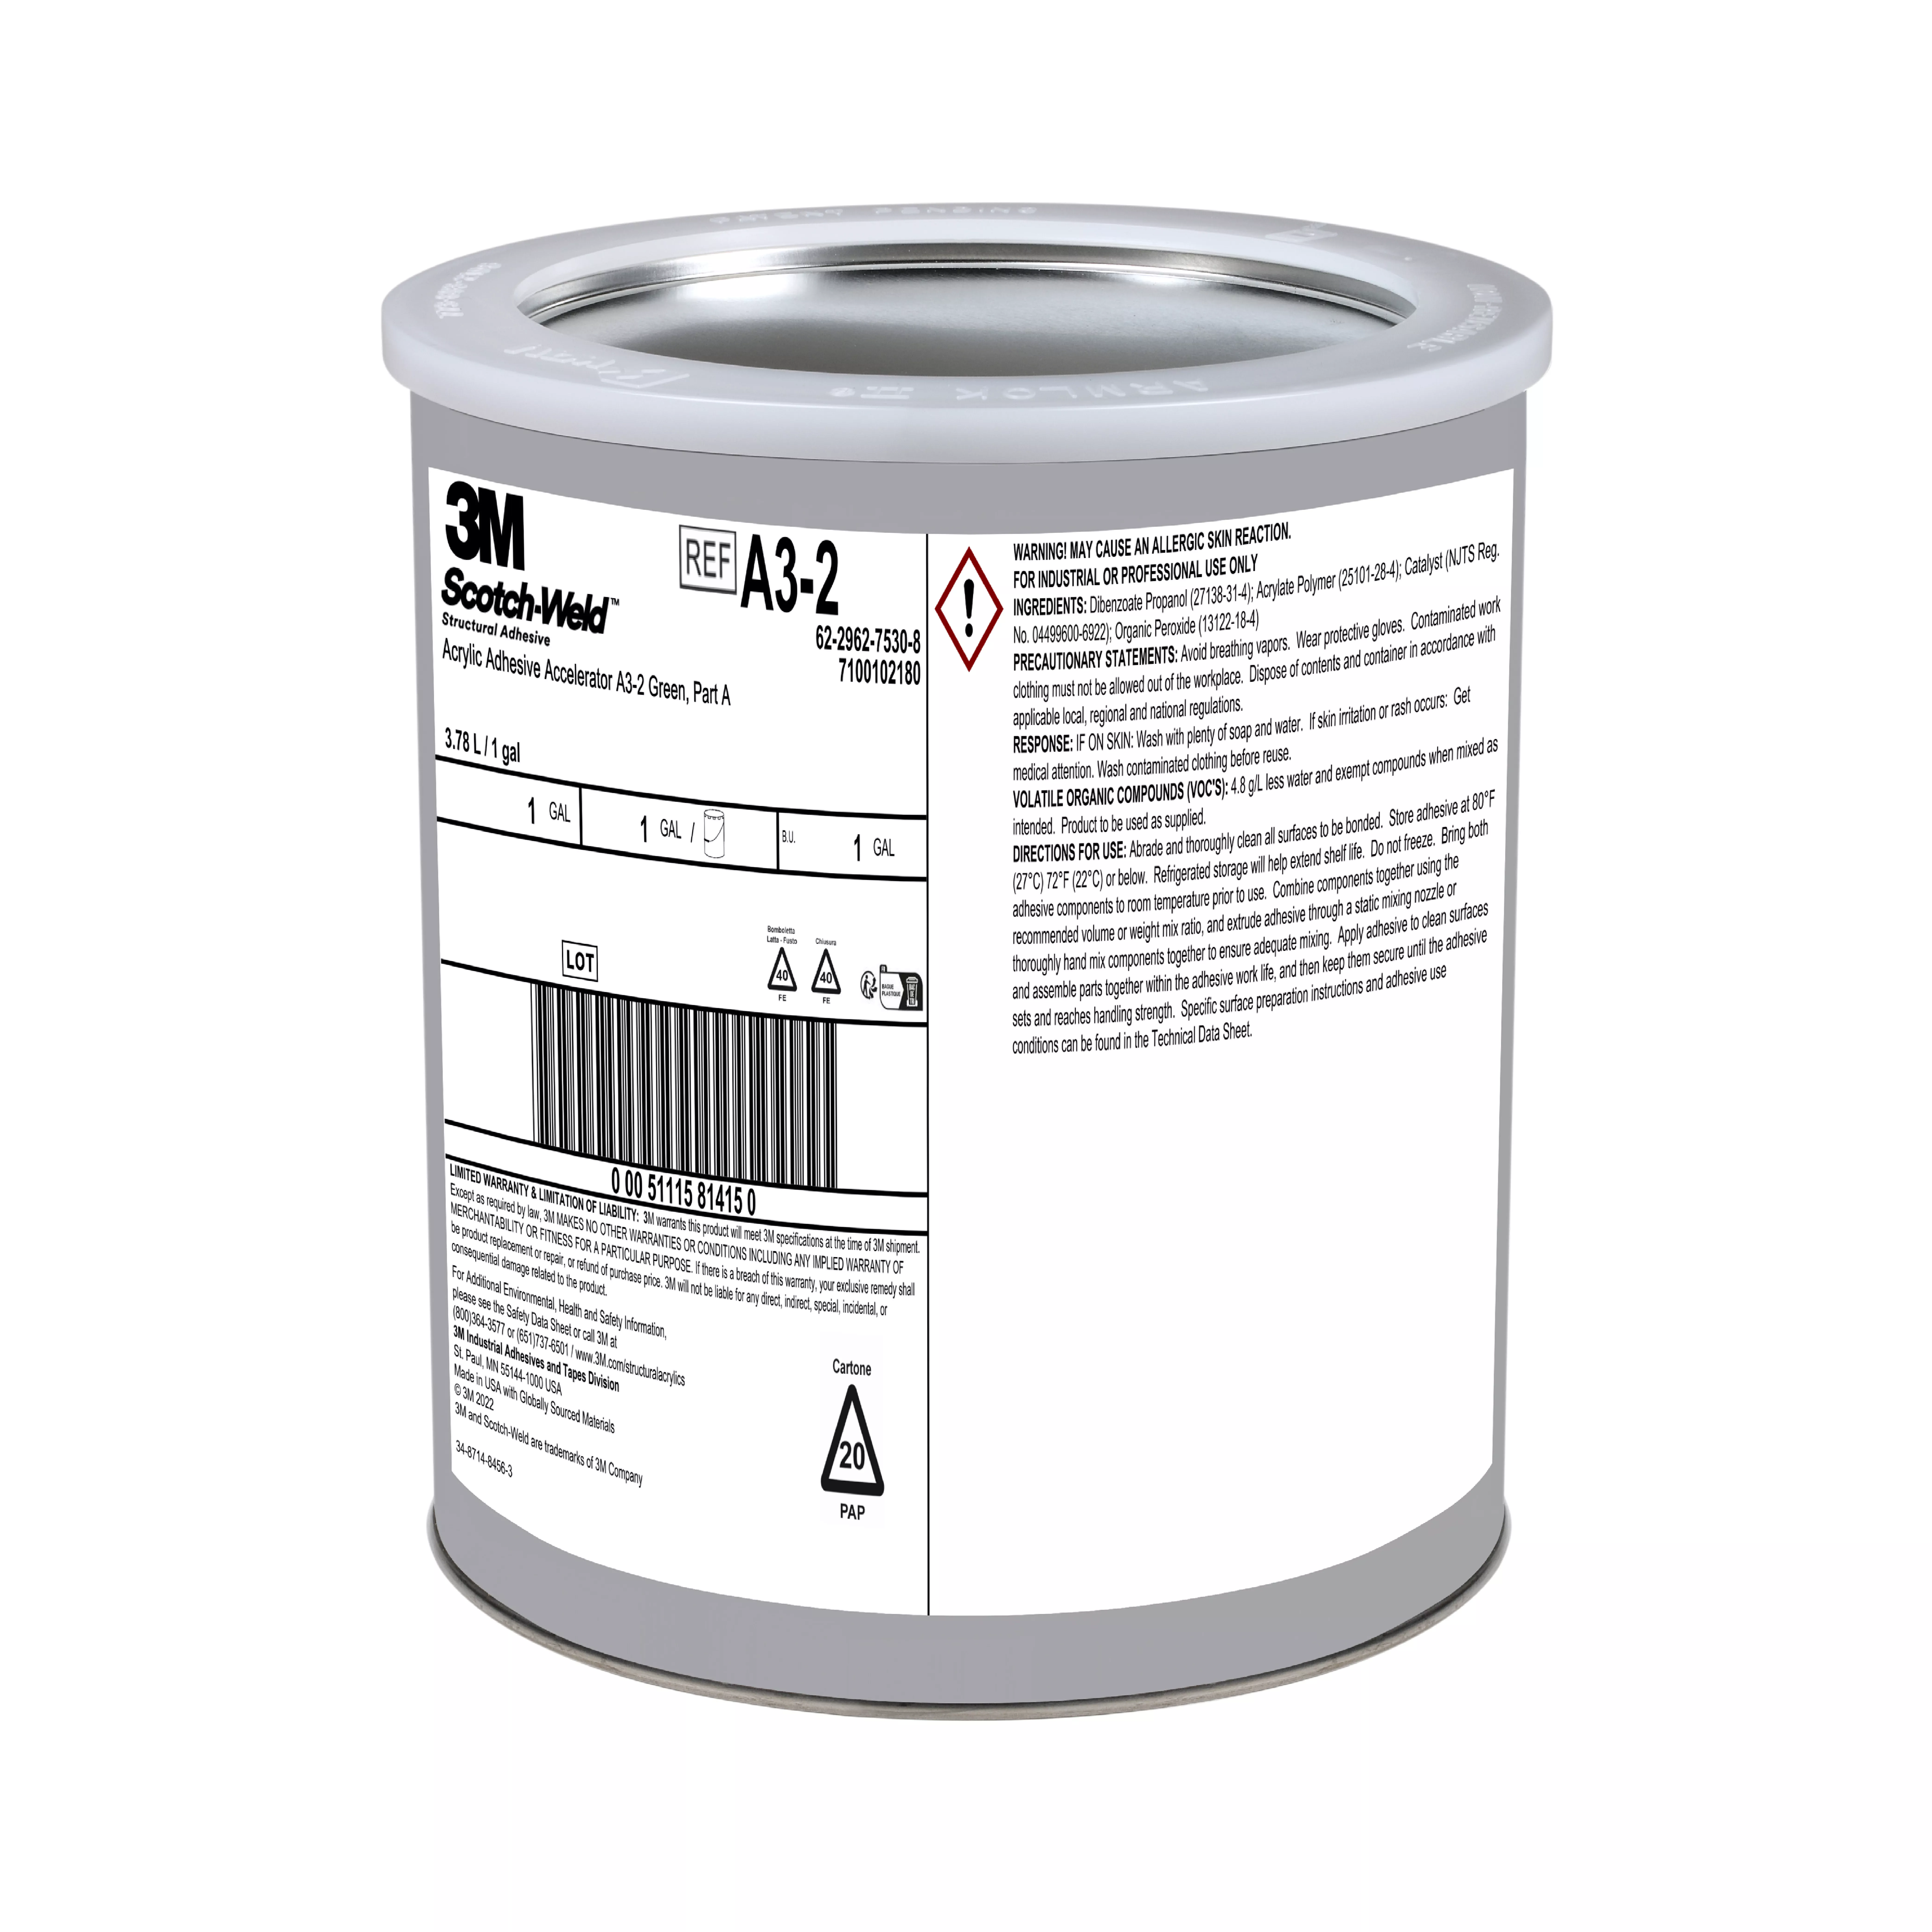 3M™ Scotch-Weld™ Acrylic Adhesive Accelerator A3-2, Green, Part A, 1
Gallon, 1 Can/Case